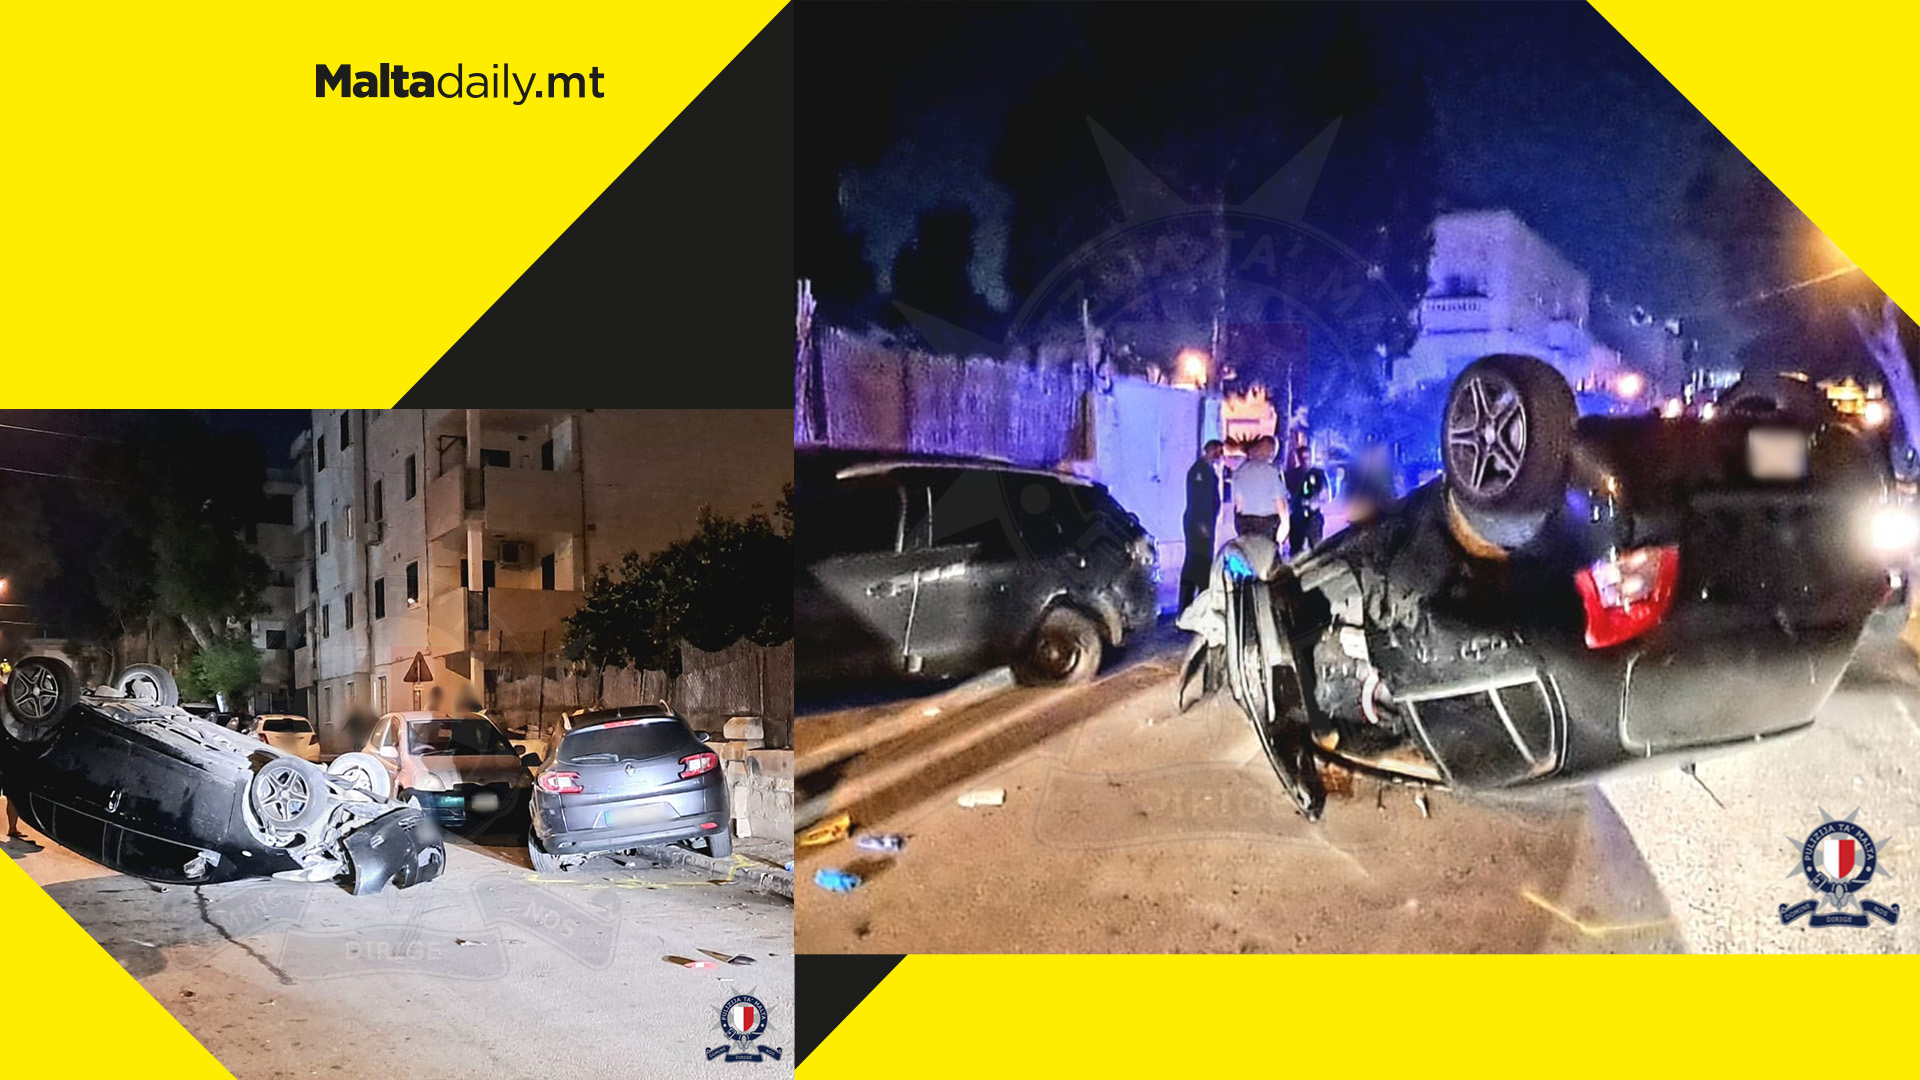 Two children injured & woman with grievous injuries after car overturns in Qormi incident